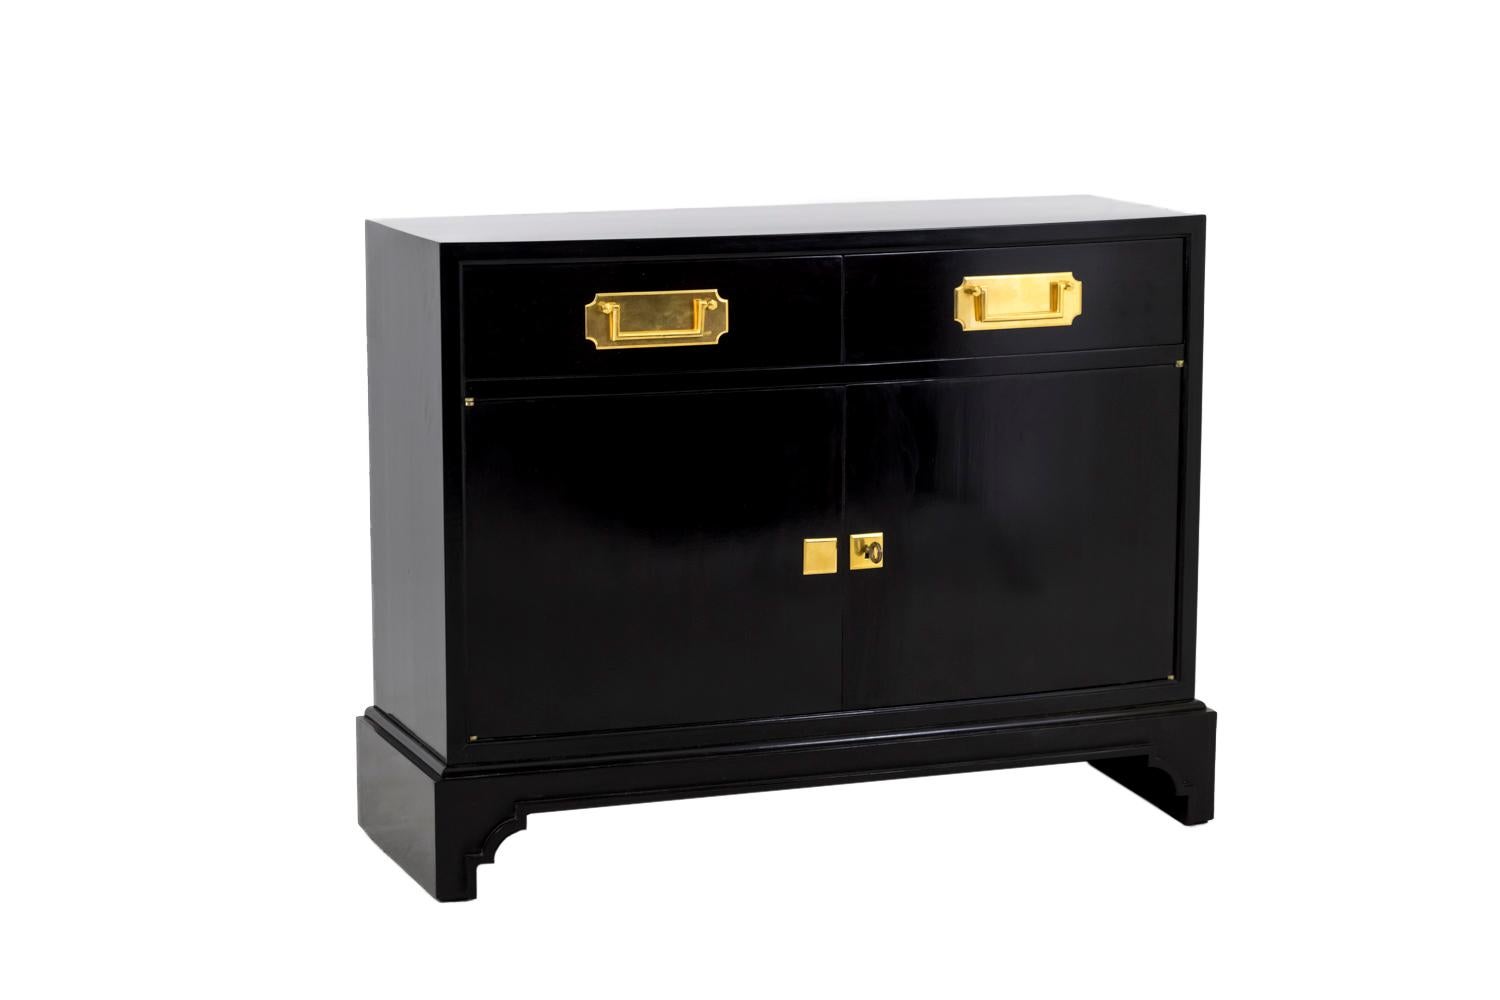 Pair of rectangular shaped black lacquered buffets, opening by one drawer divided in two parts and two-door leaves. Gilt bronze escutcheons and rectangular handles on a cartouche background. Larger leg than the furniture body, slightly opened on the